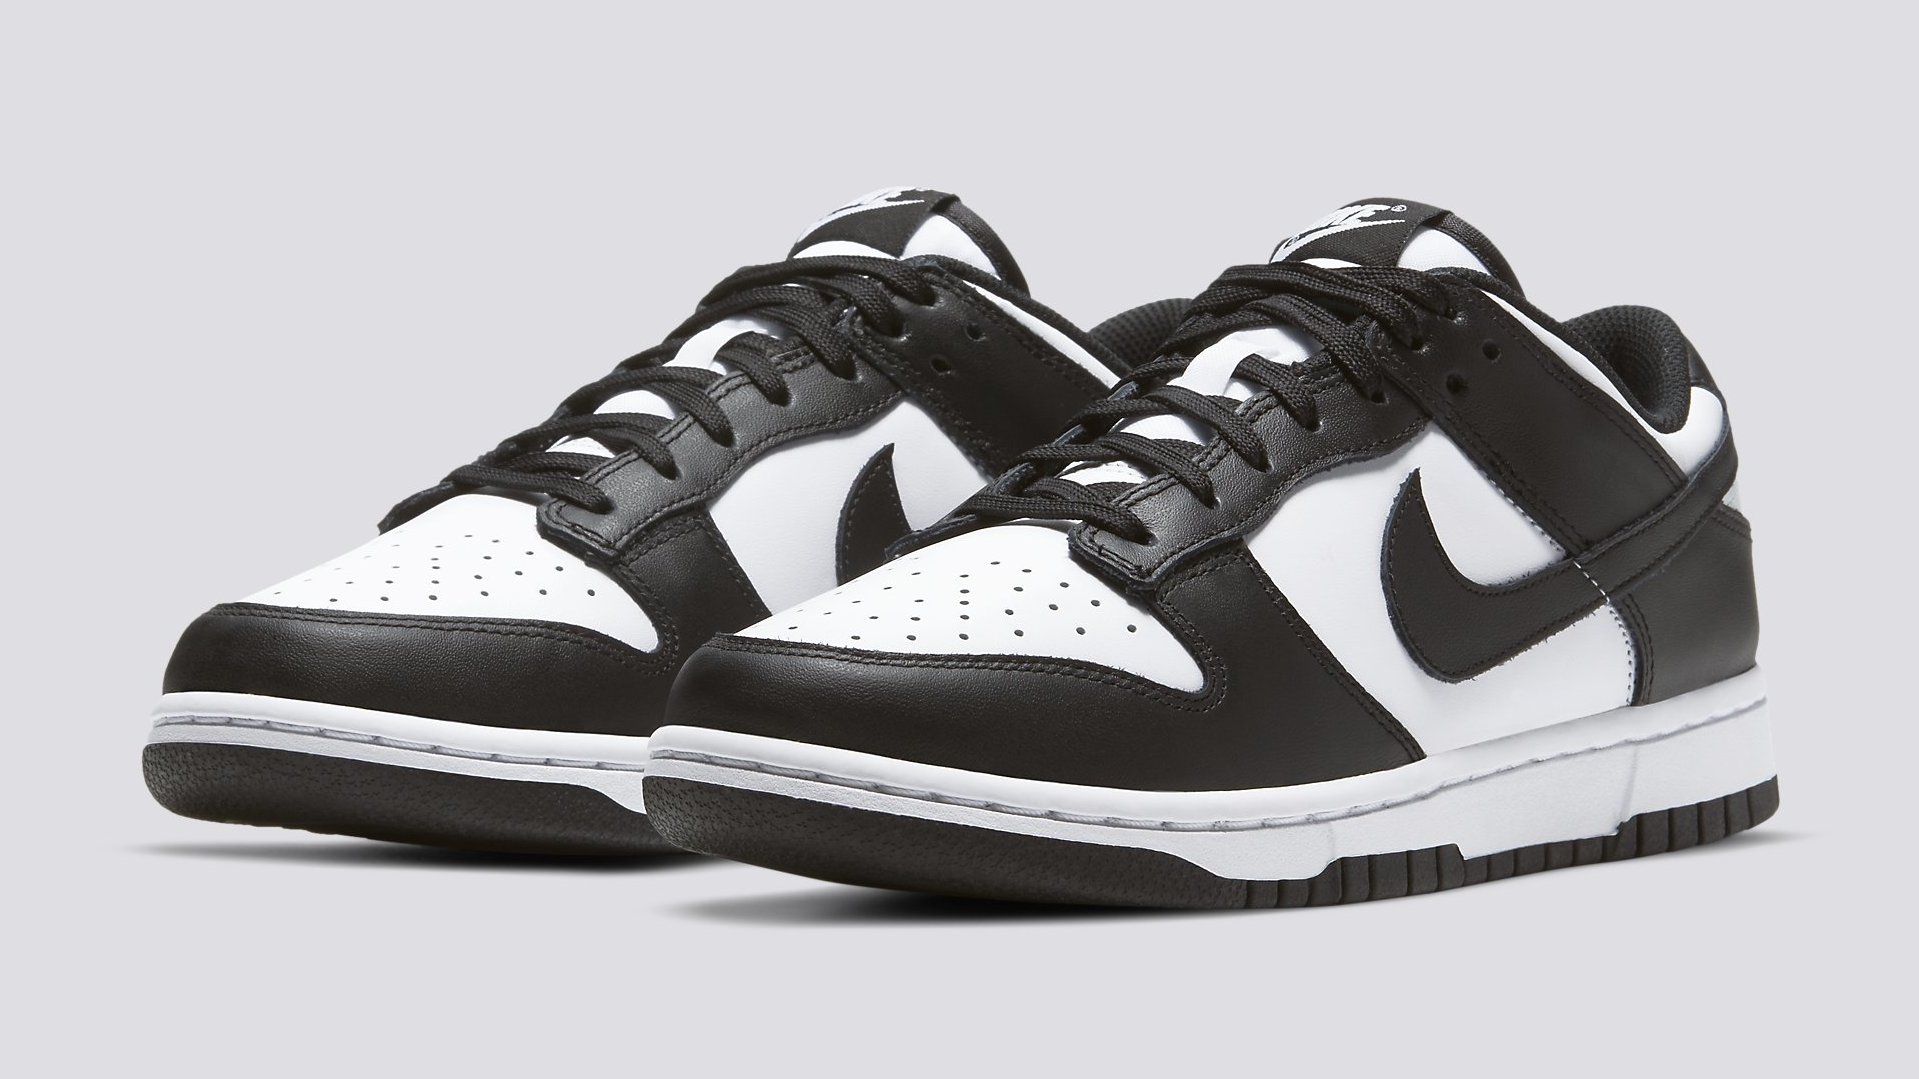 Black-and-White Nike Dunk Is Restocking Soon